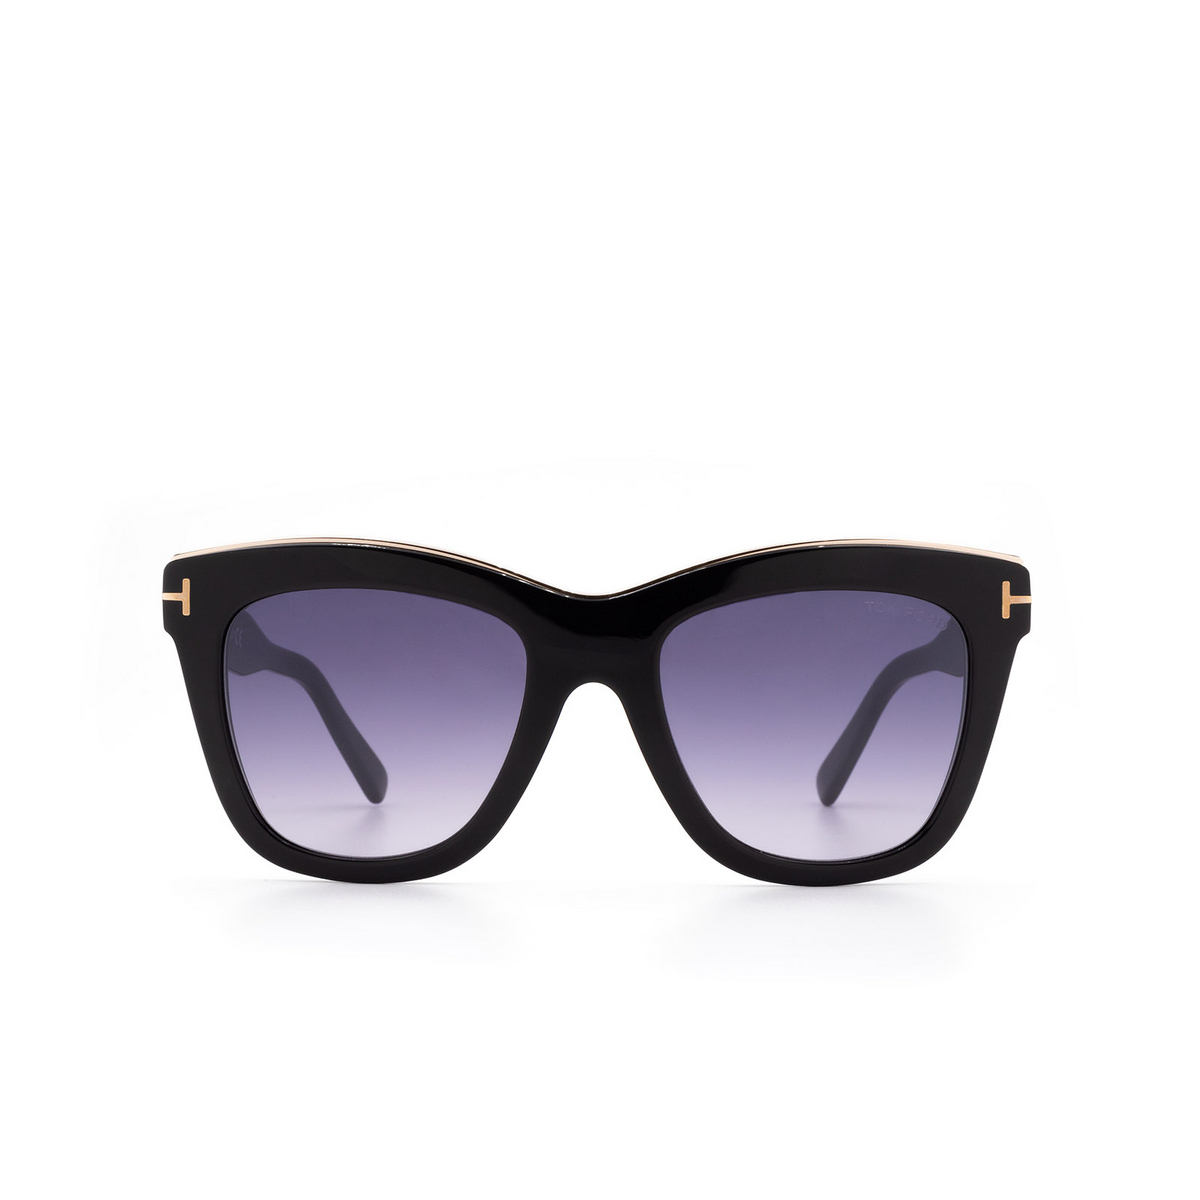 Tom Ford JULIE Sunglasses 01C Shiny Black - front view